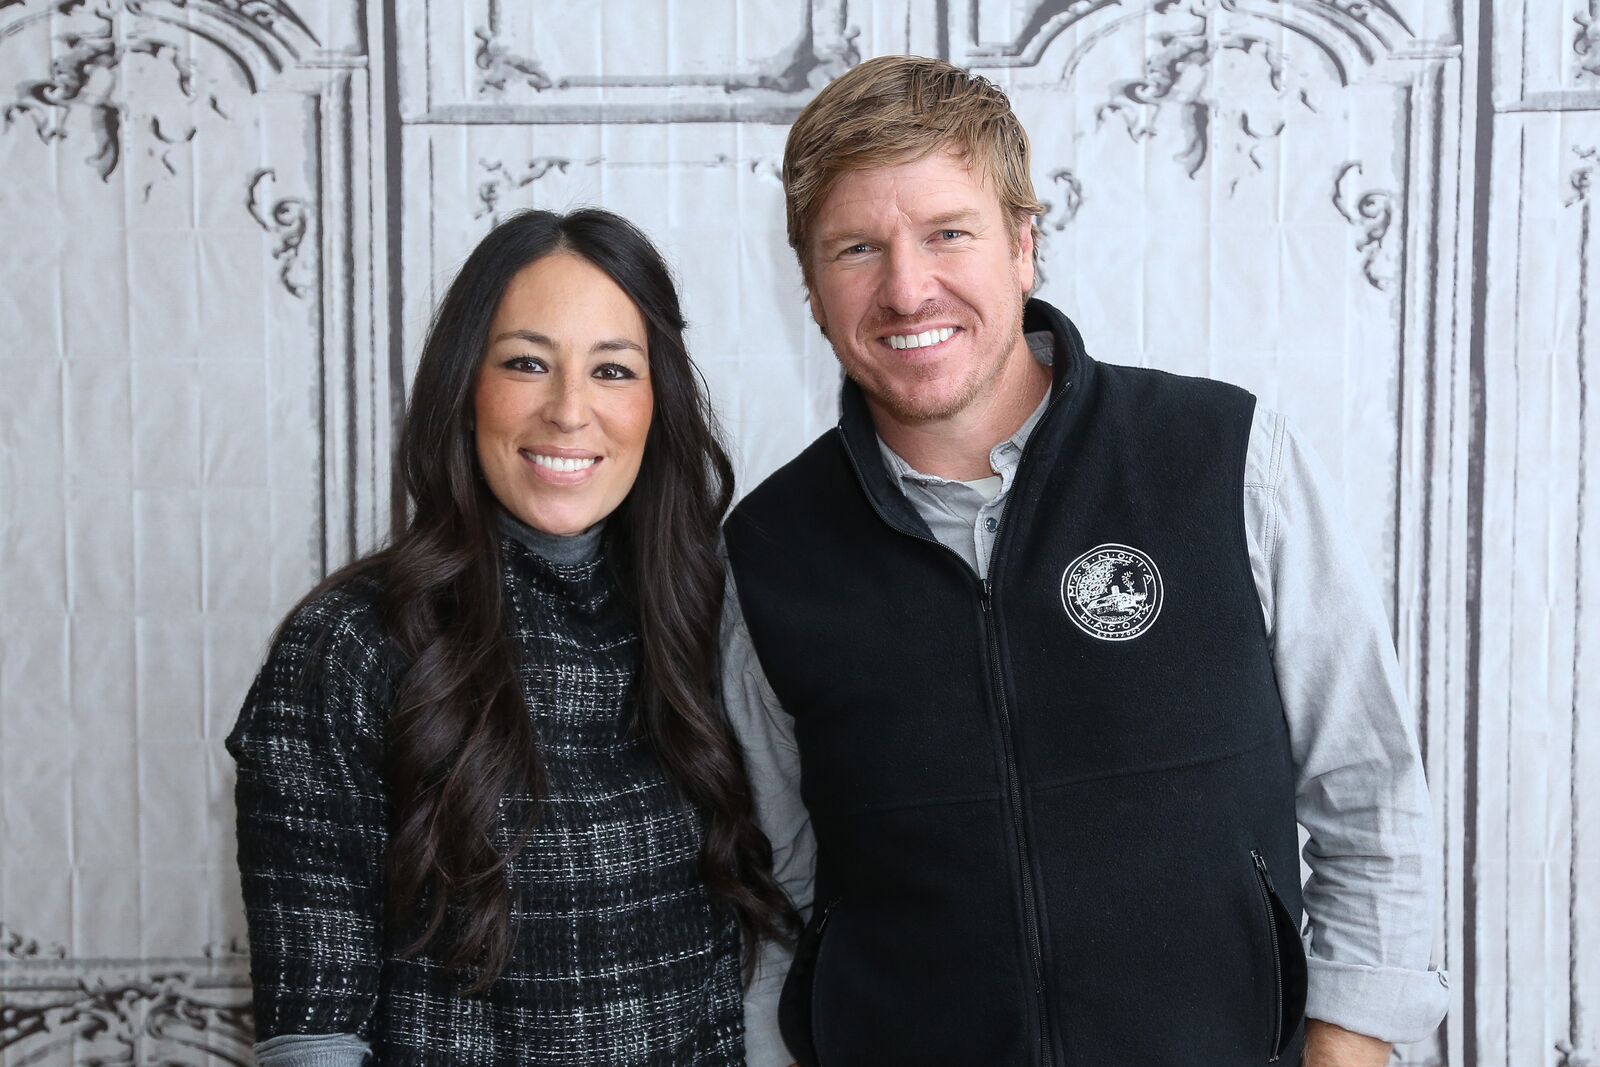 Real estate pros Chip Gaines (R) and Joanna Gaines attend AOL Build Presents: "Fixer Upper" at AOL Studios In New York on December 8, 2015 in New York City | Photo: Getty Images